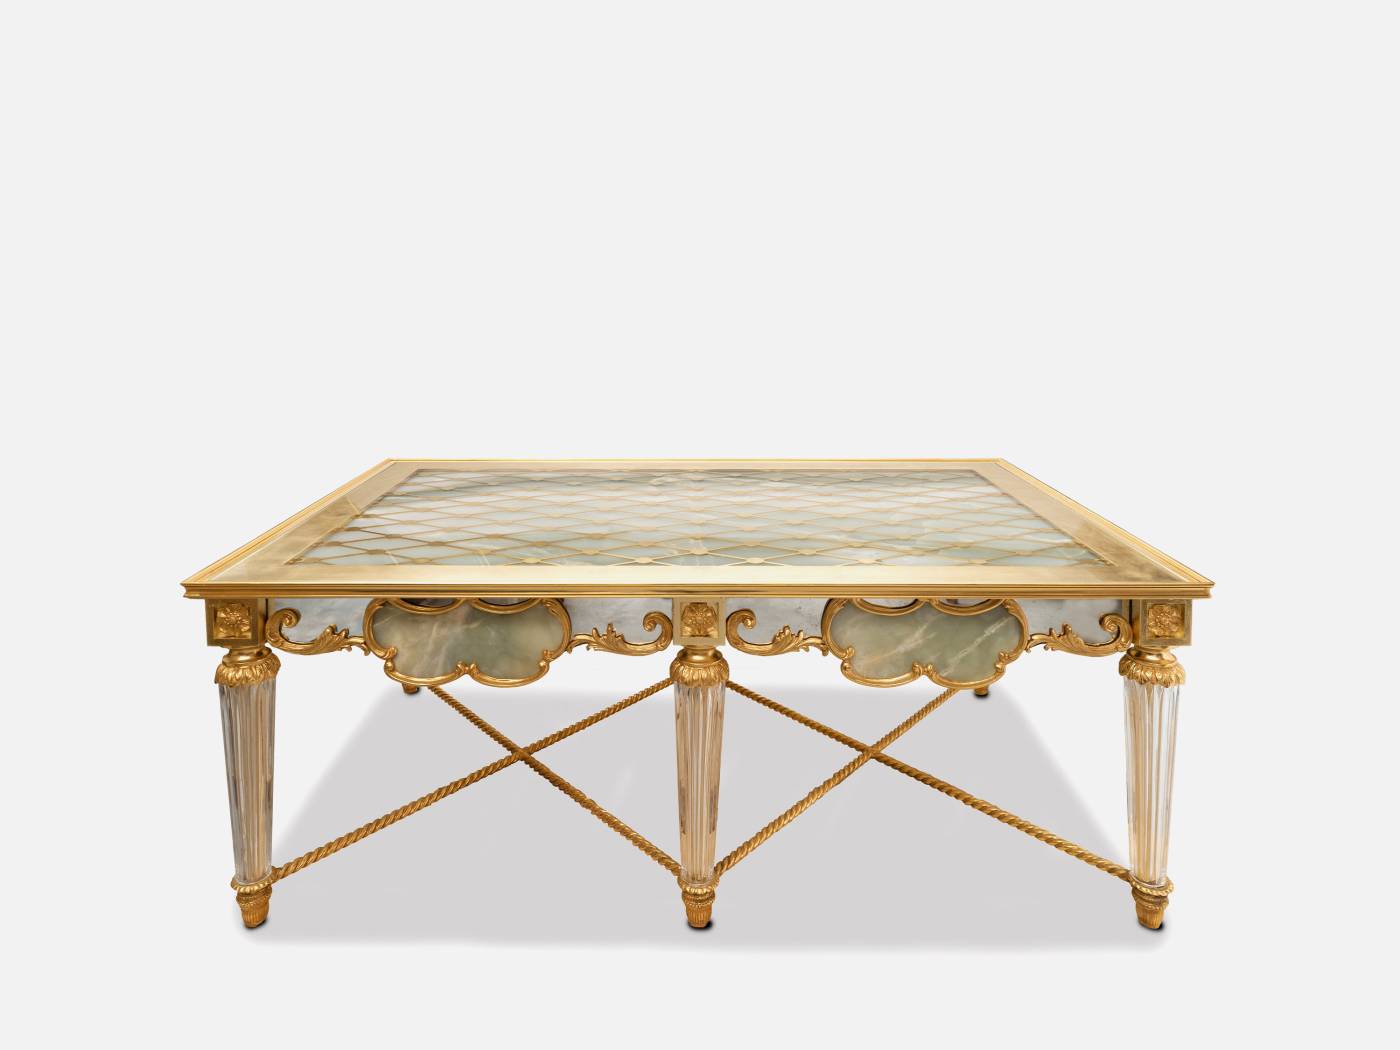 ART. 2192 - C.G. Capelletti quality furniture and timeless elegance with luxury made in italy contemporary Small tables.